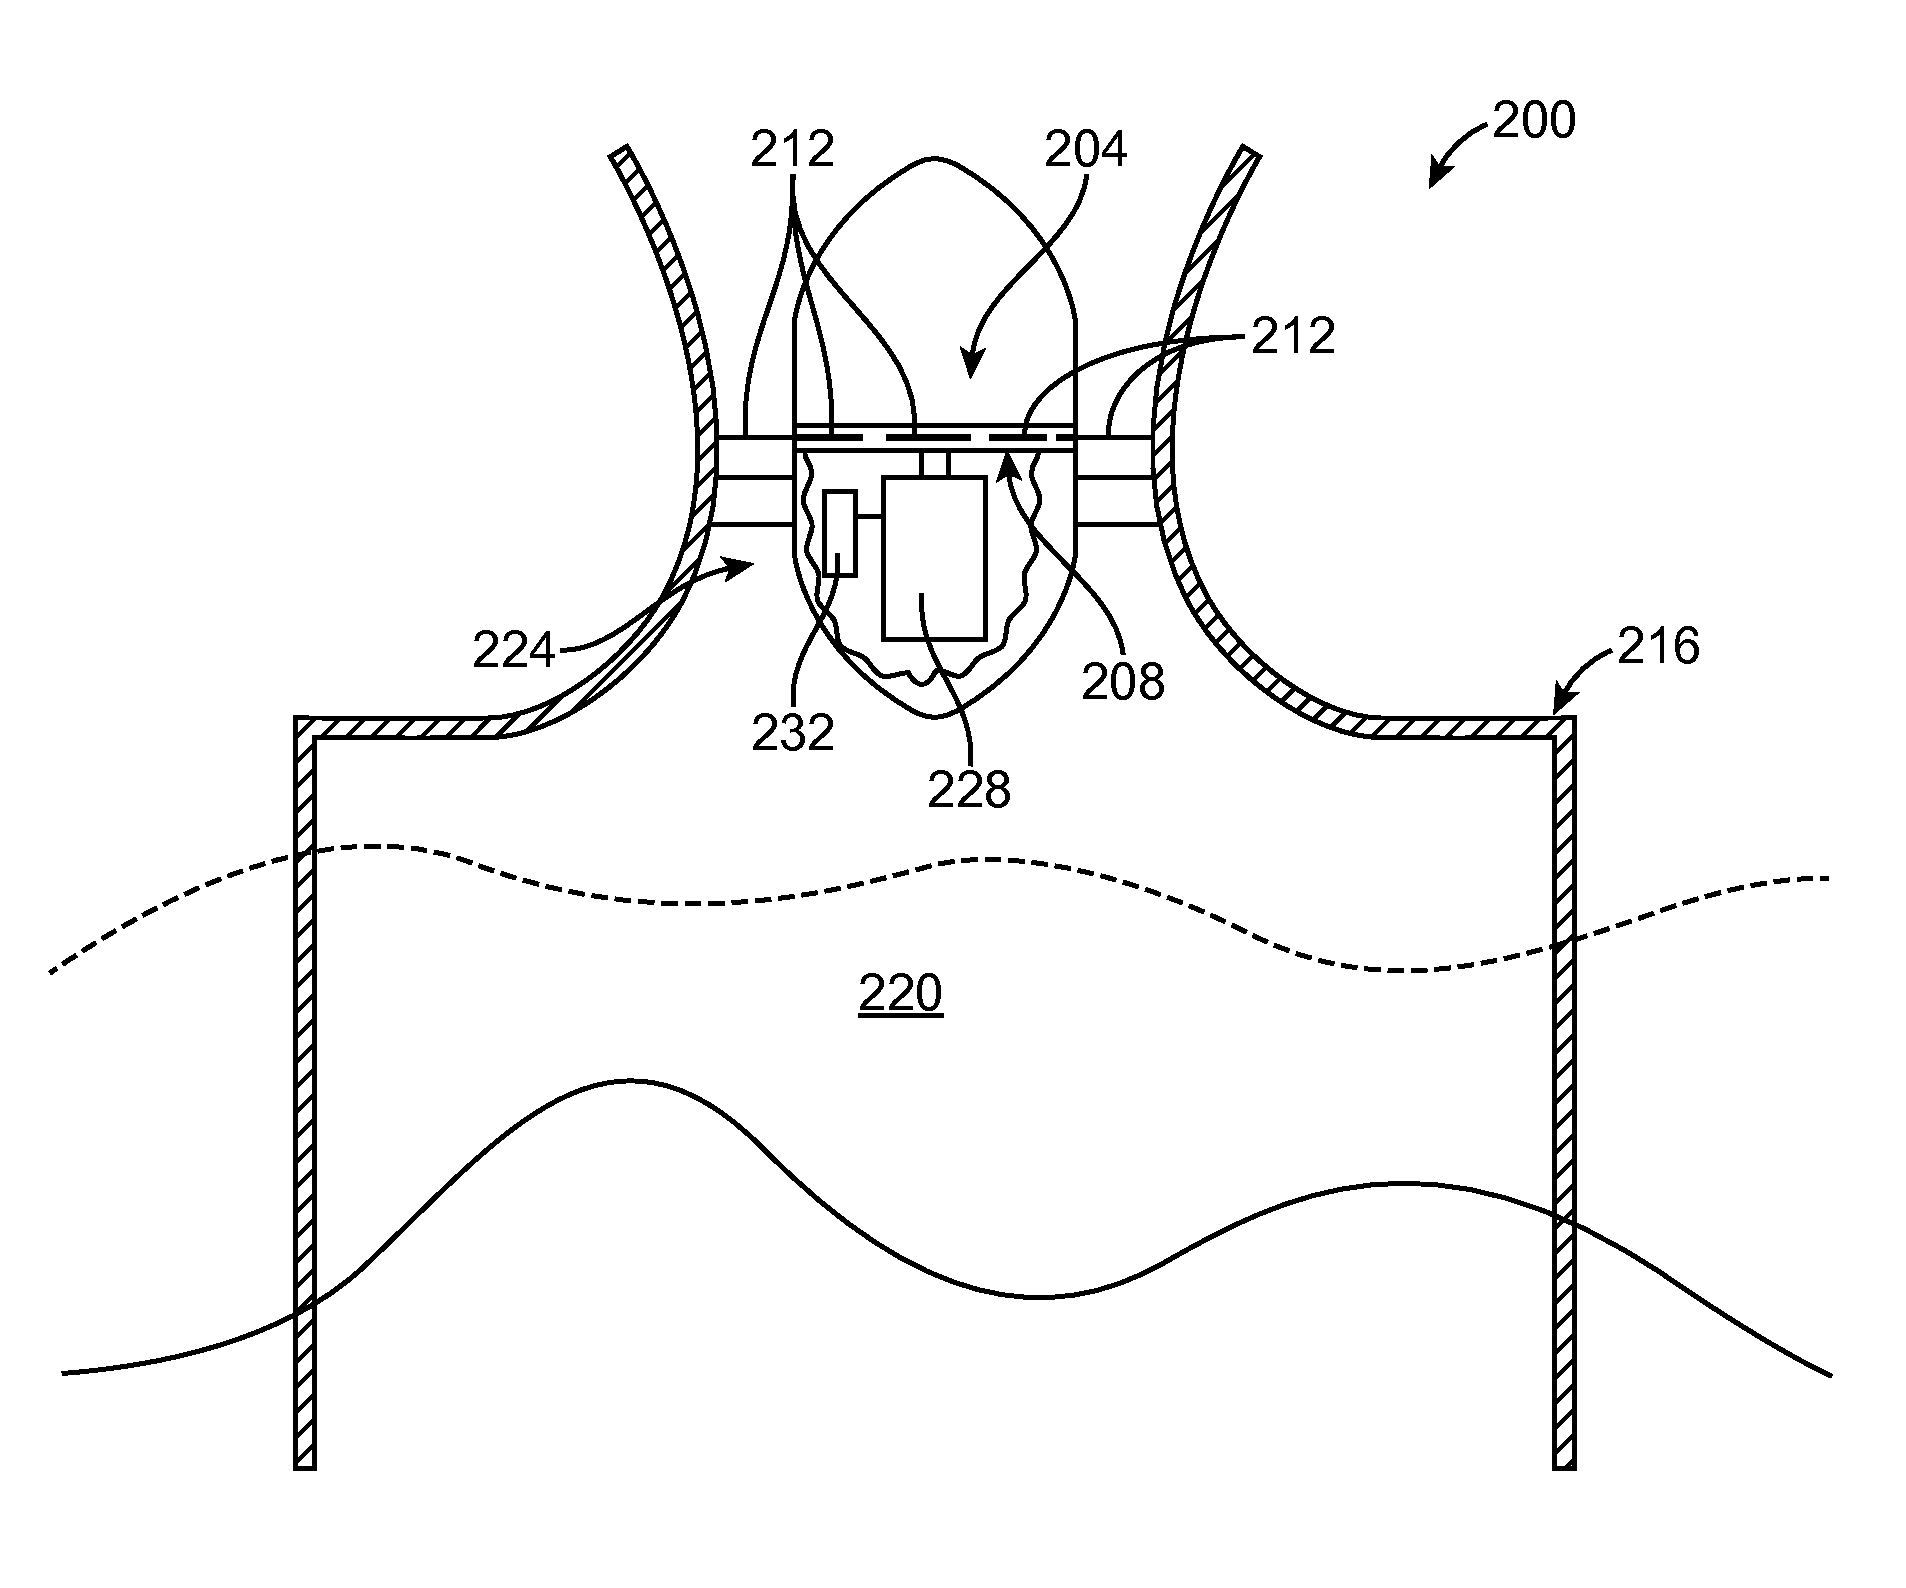 Turbomachinery Having Self-Articulating Blades, Shutter Valve, Partial-Admission Shutters, and/or Variable-Pitch Inlet Nozzles